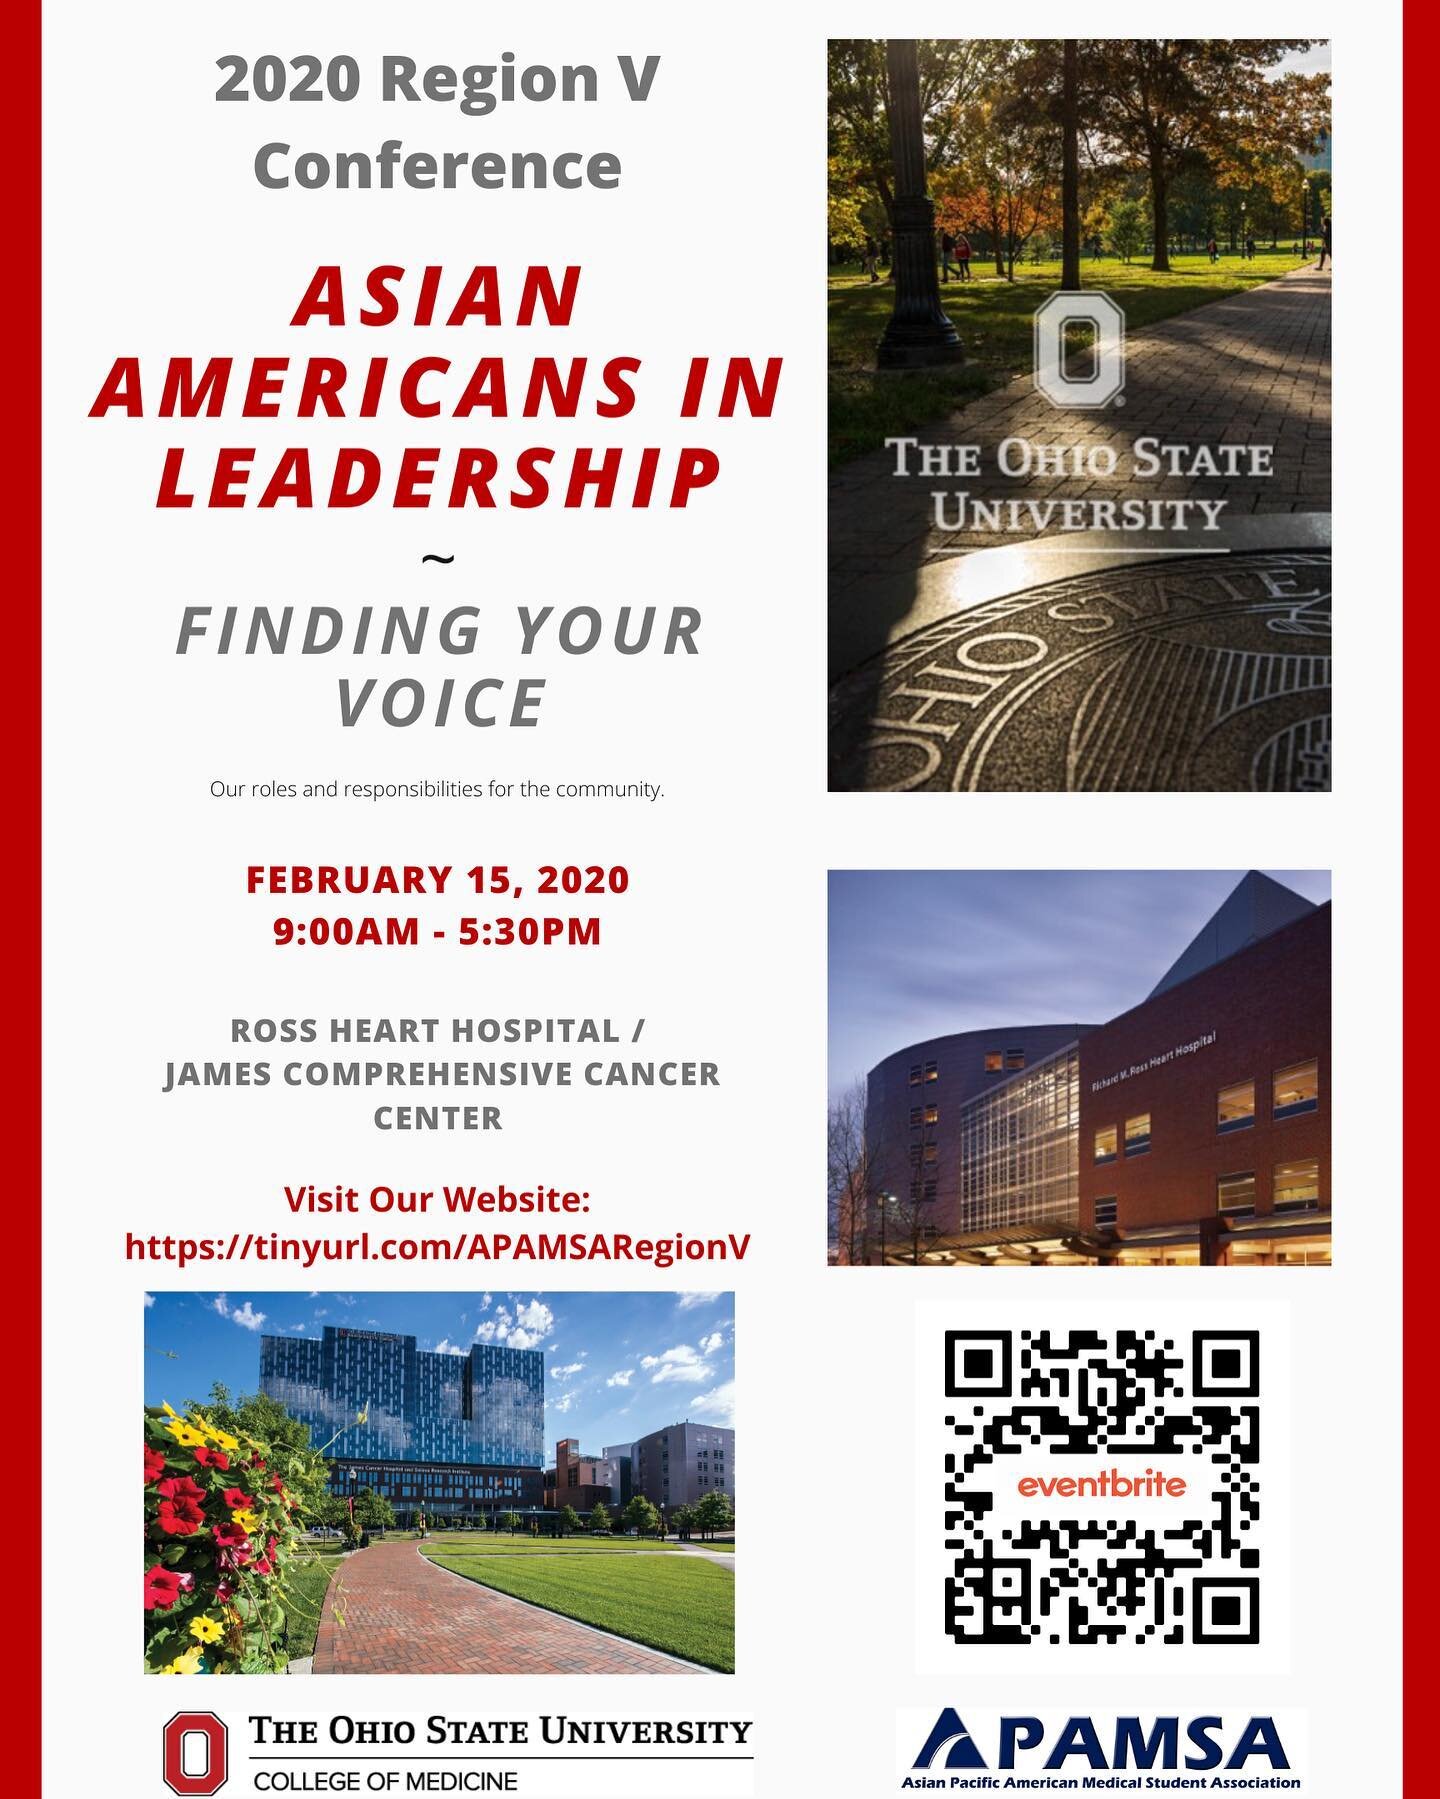 A message from our very own APAMSA student group!!!
&bull;
&bull;
We would love to invite you to our annual conference taking place at the Ohio State University College of Medicine on Saturday, February 15 at the Ross Heart Hospital/ James Comprehens